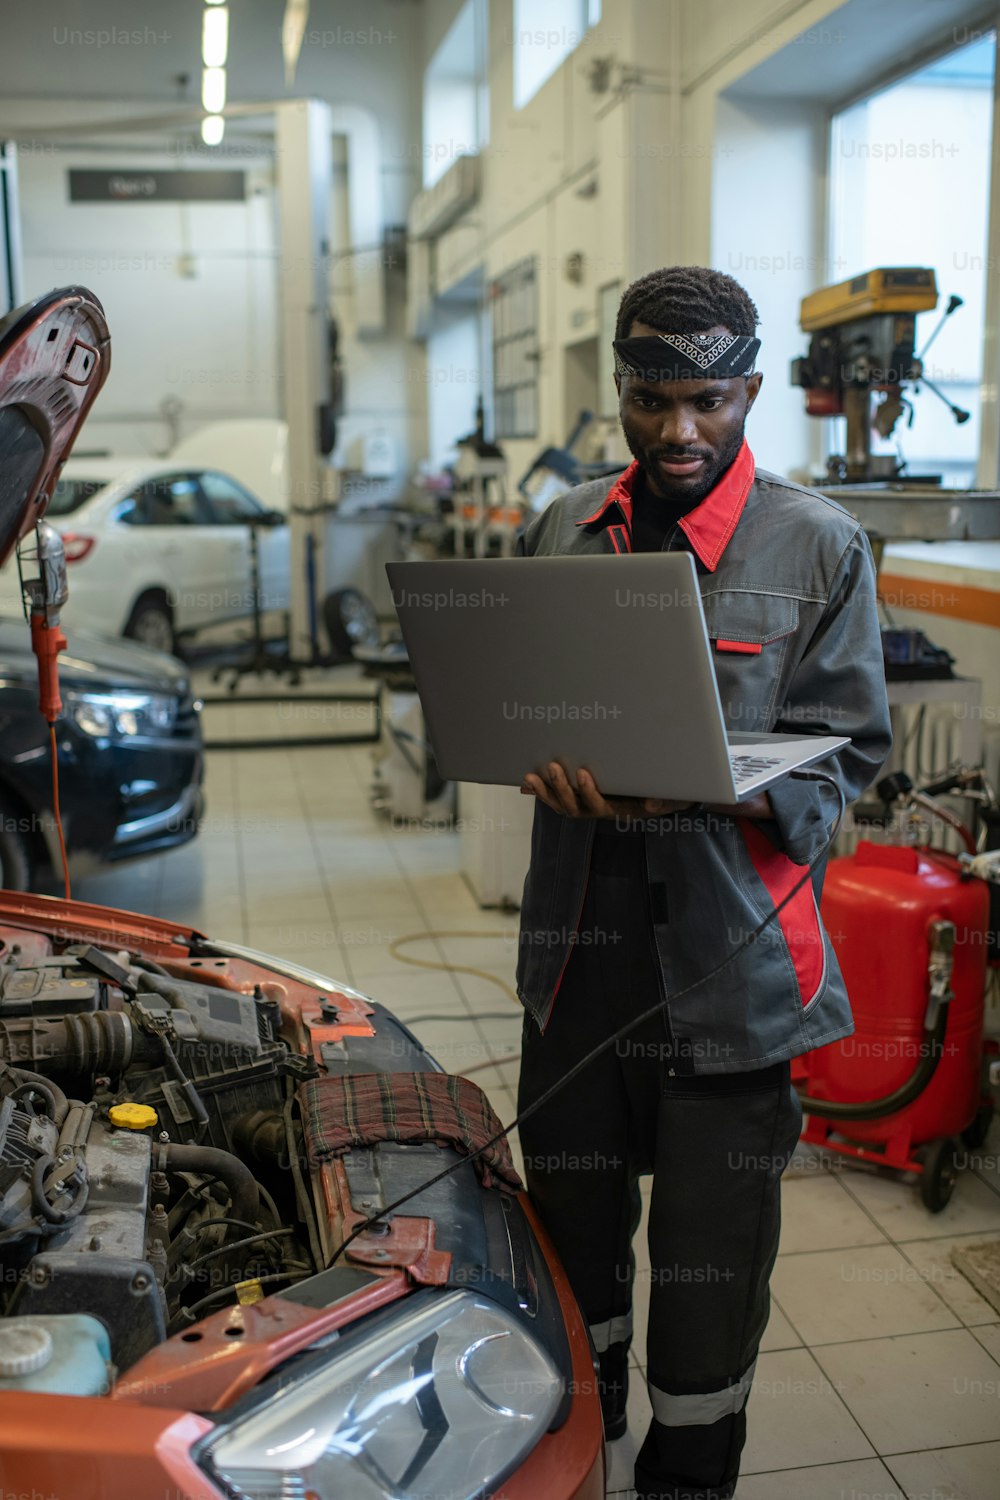 Vertical portrait of African-American mechanic standing by car in auto repair shop and using laptop while inspecting vehicle